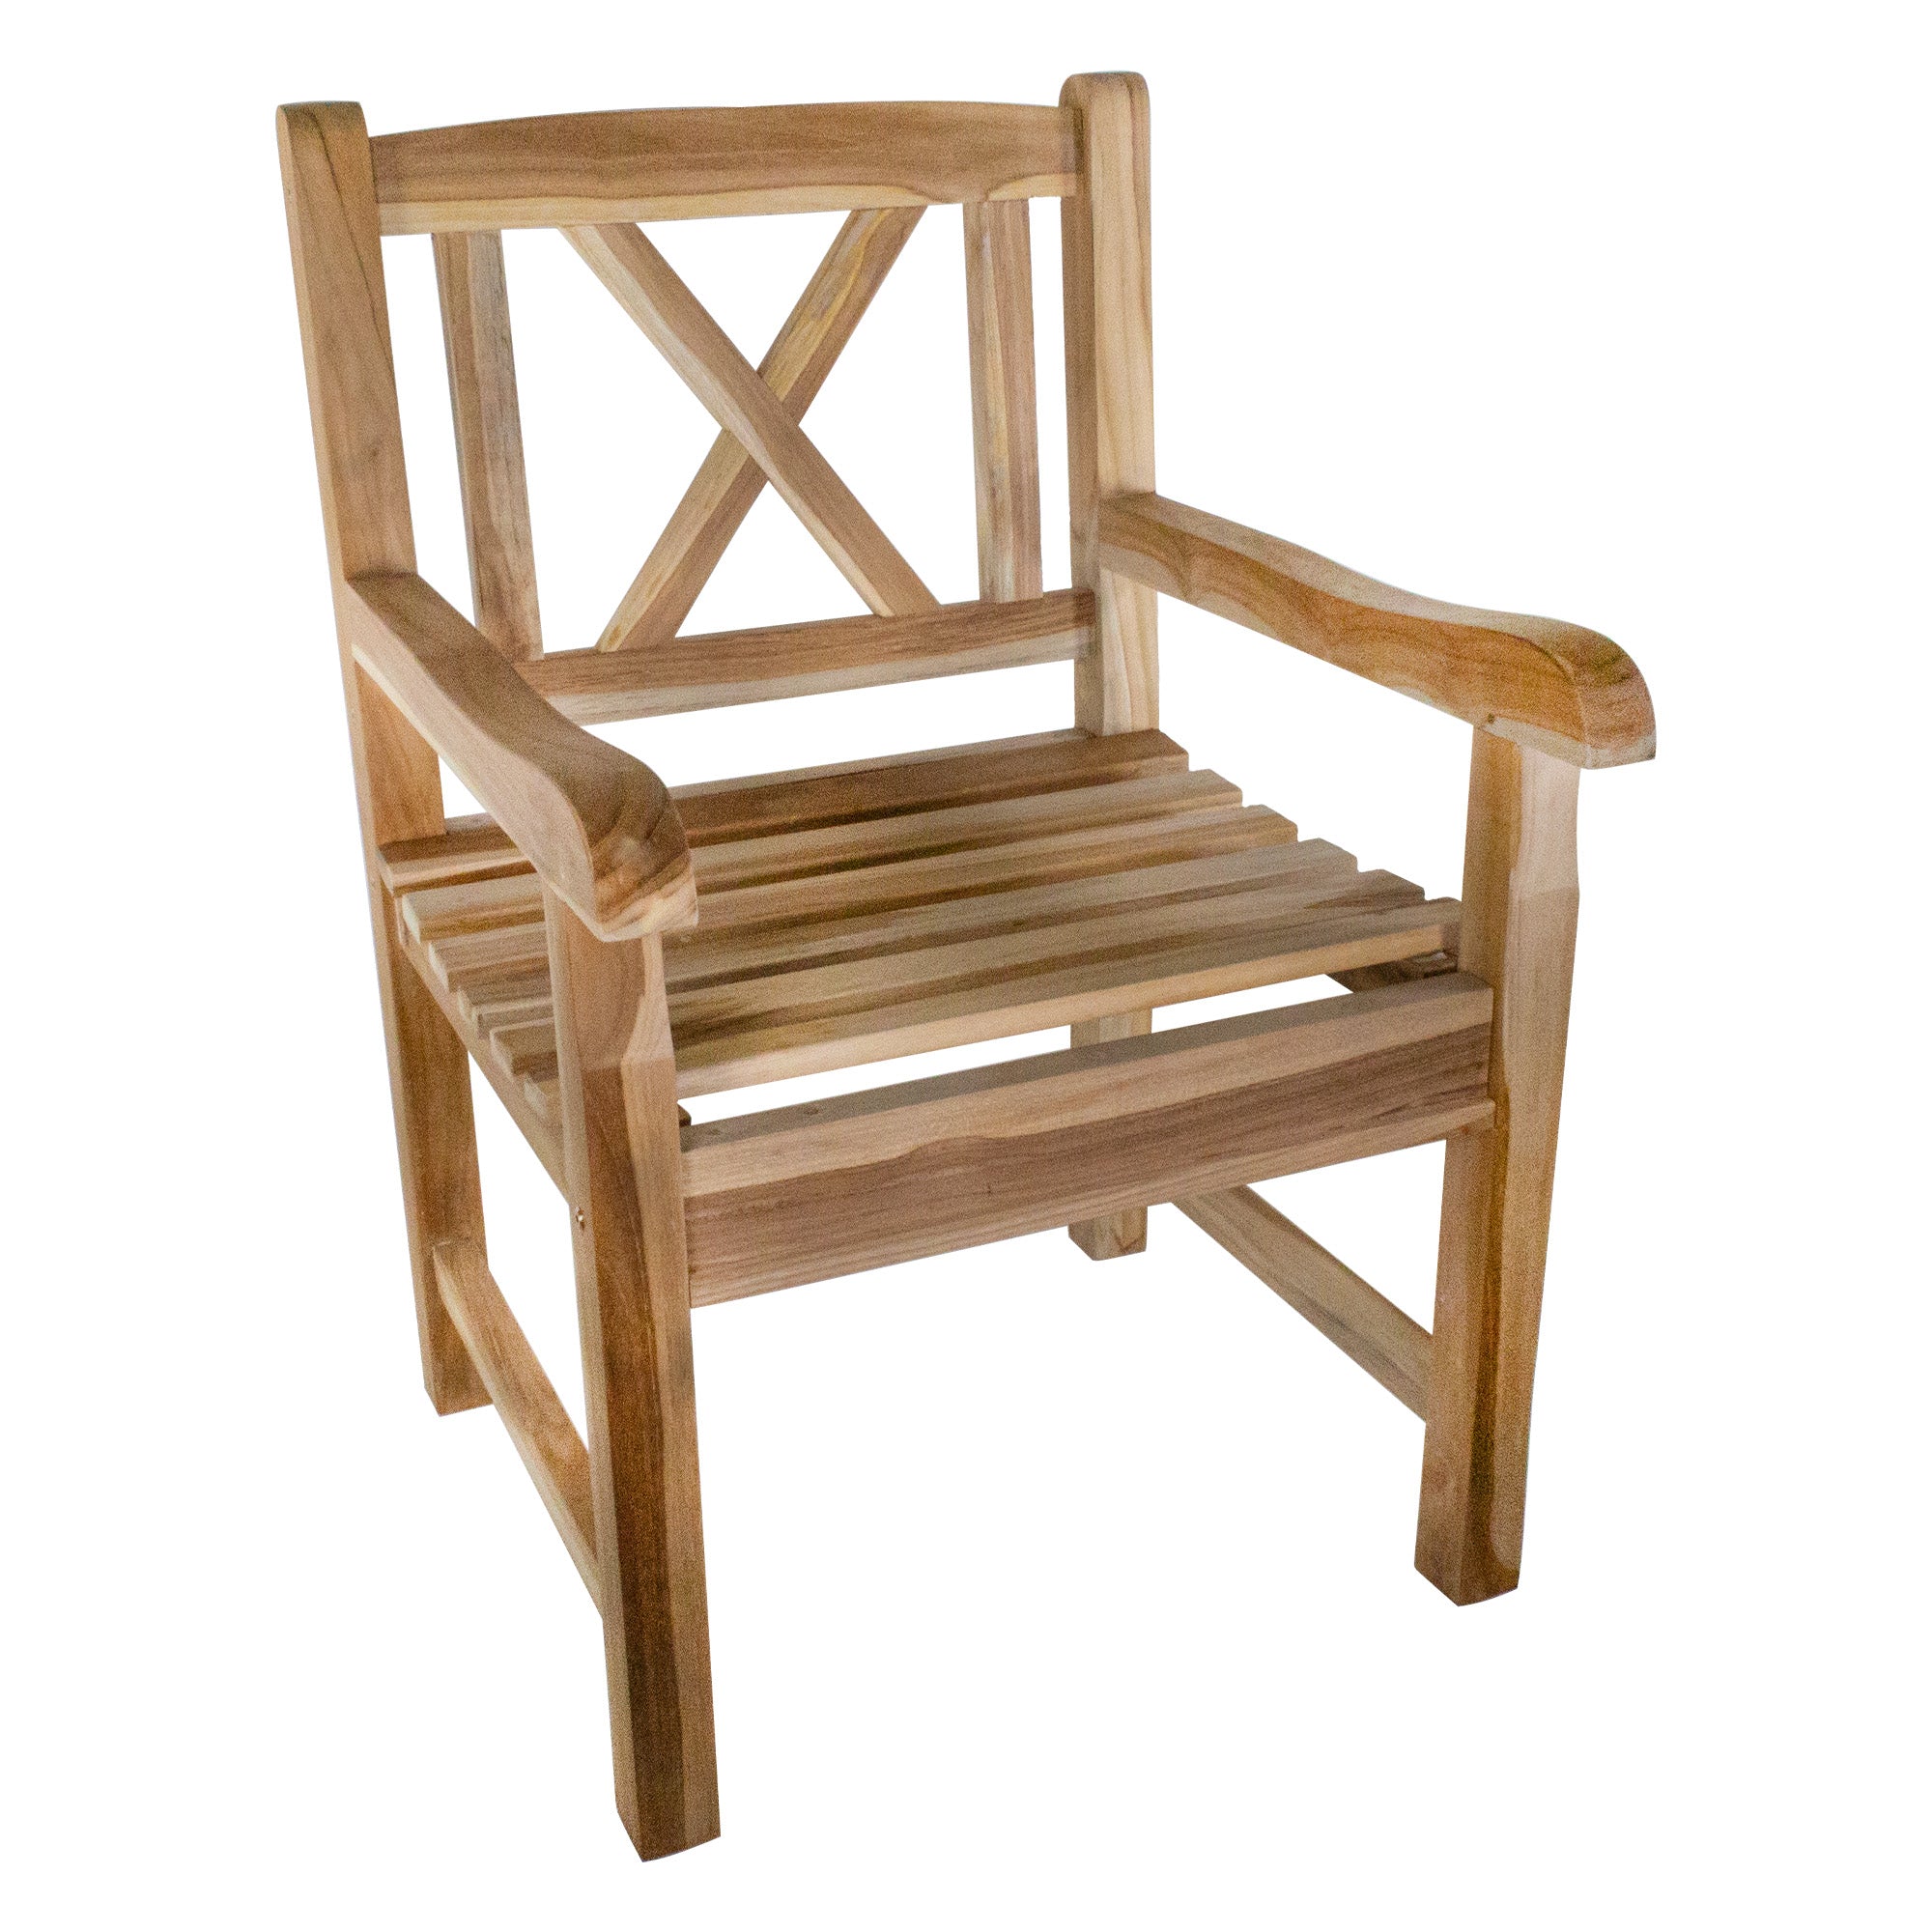 Stockholm Natural Teak Outdoor Patio Dining Chair with Arm Rests